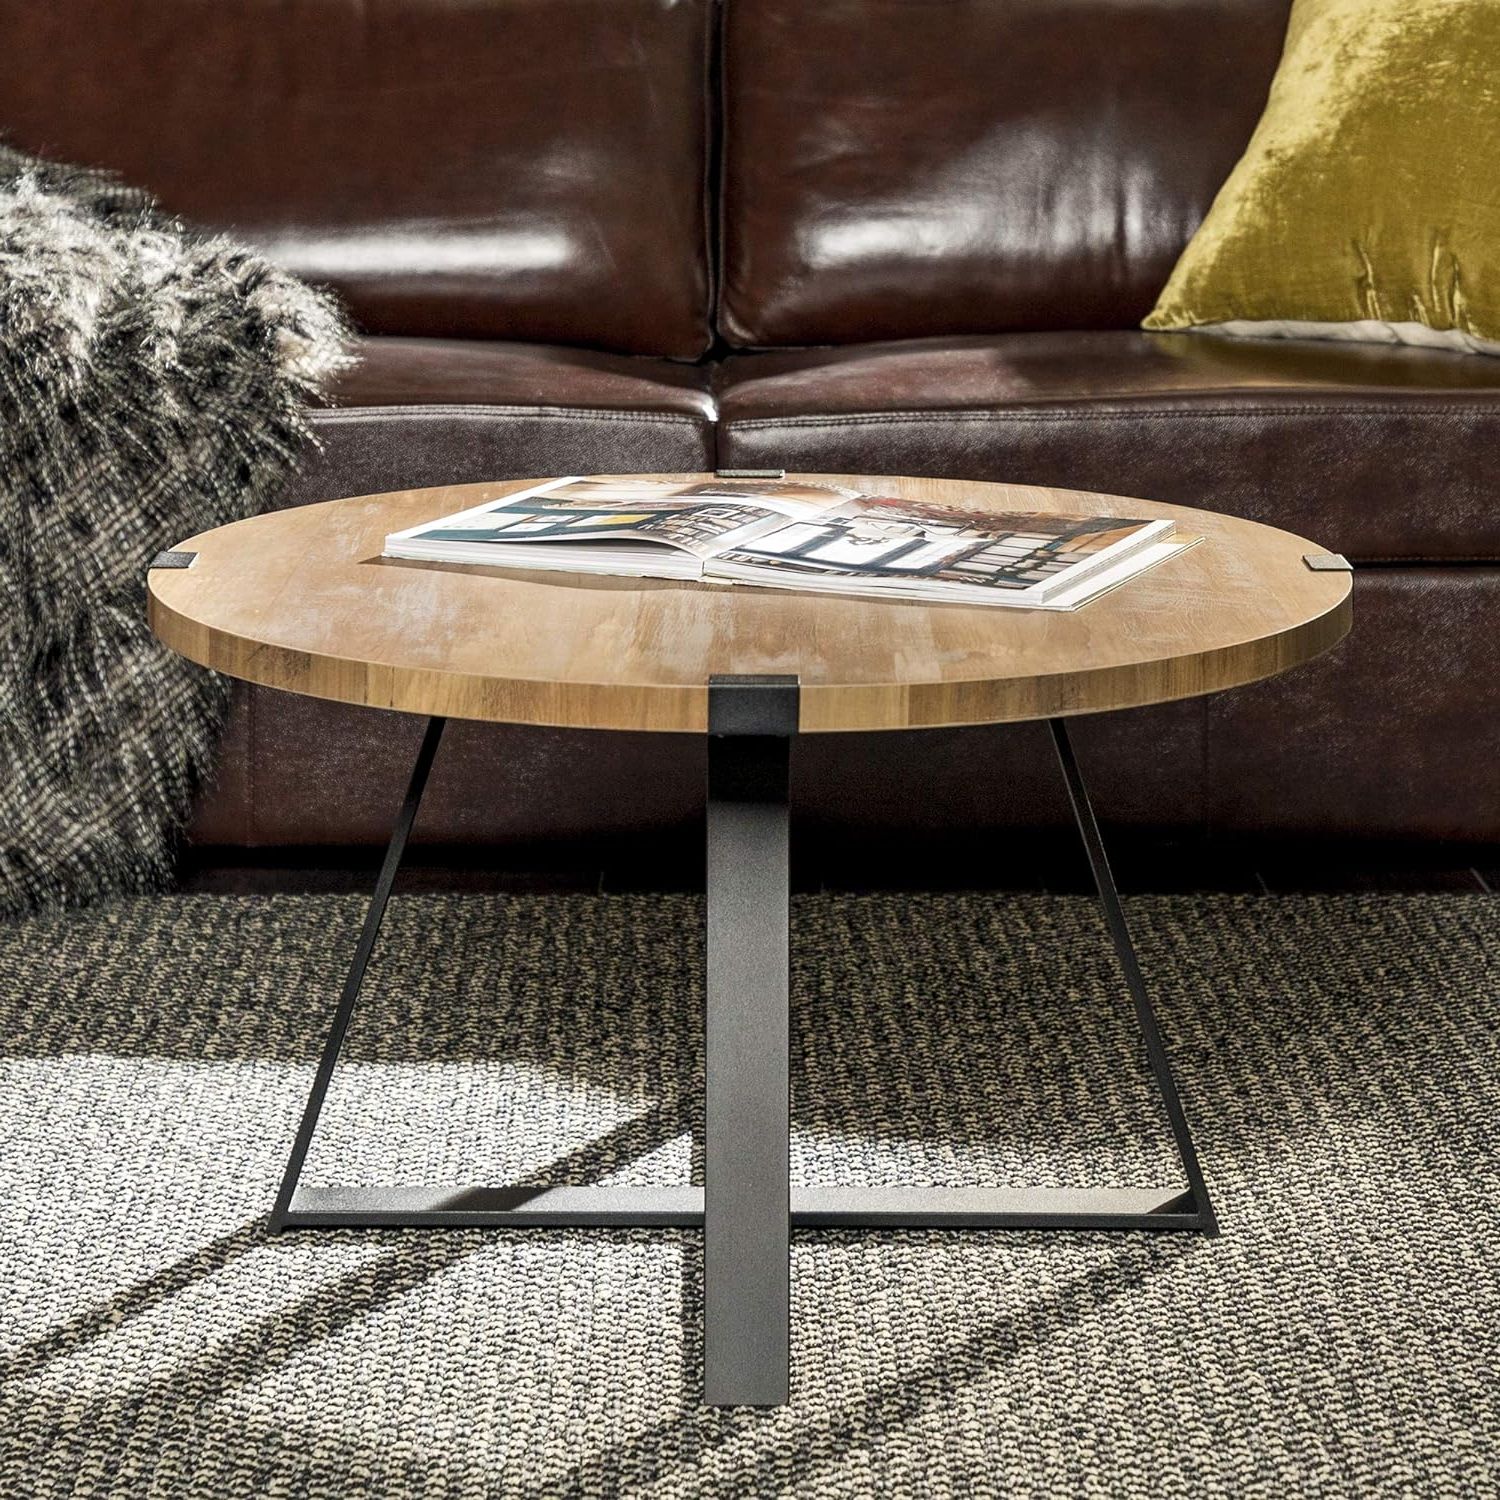 Eden Bridge Designs Industrial Urban Round Coffee Table, Metal Legs And With Regard To Most Current Round Coffee Tables With Steel Frames (View 15 of 15)